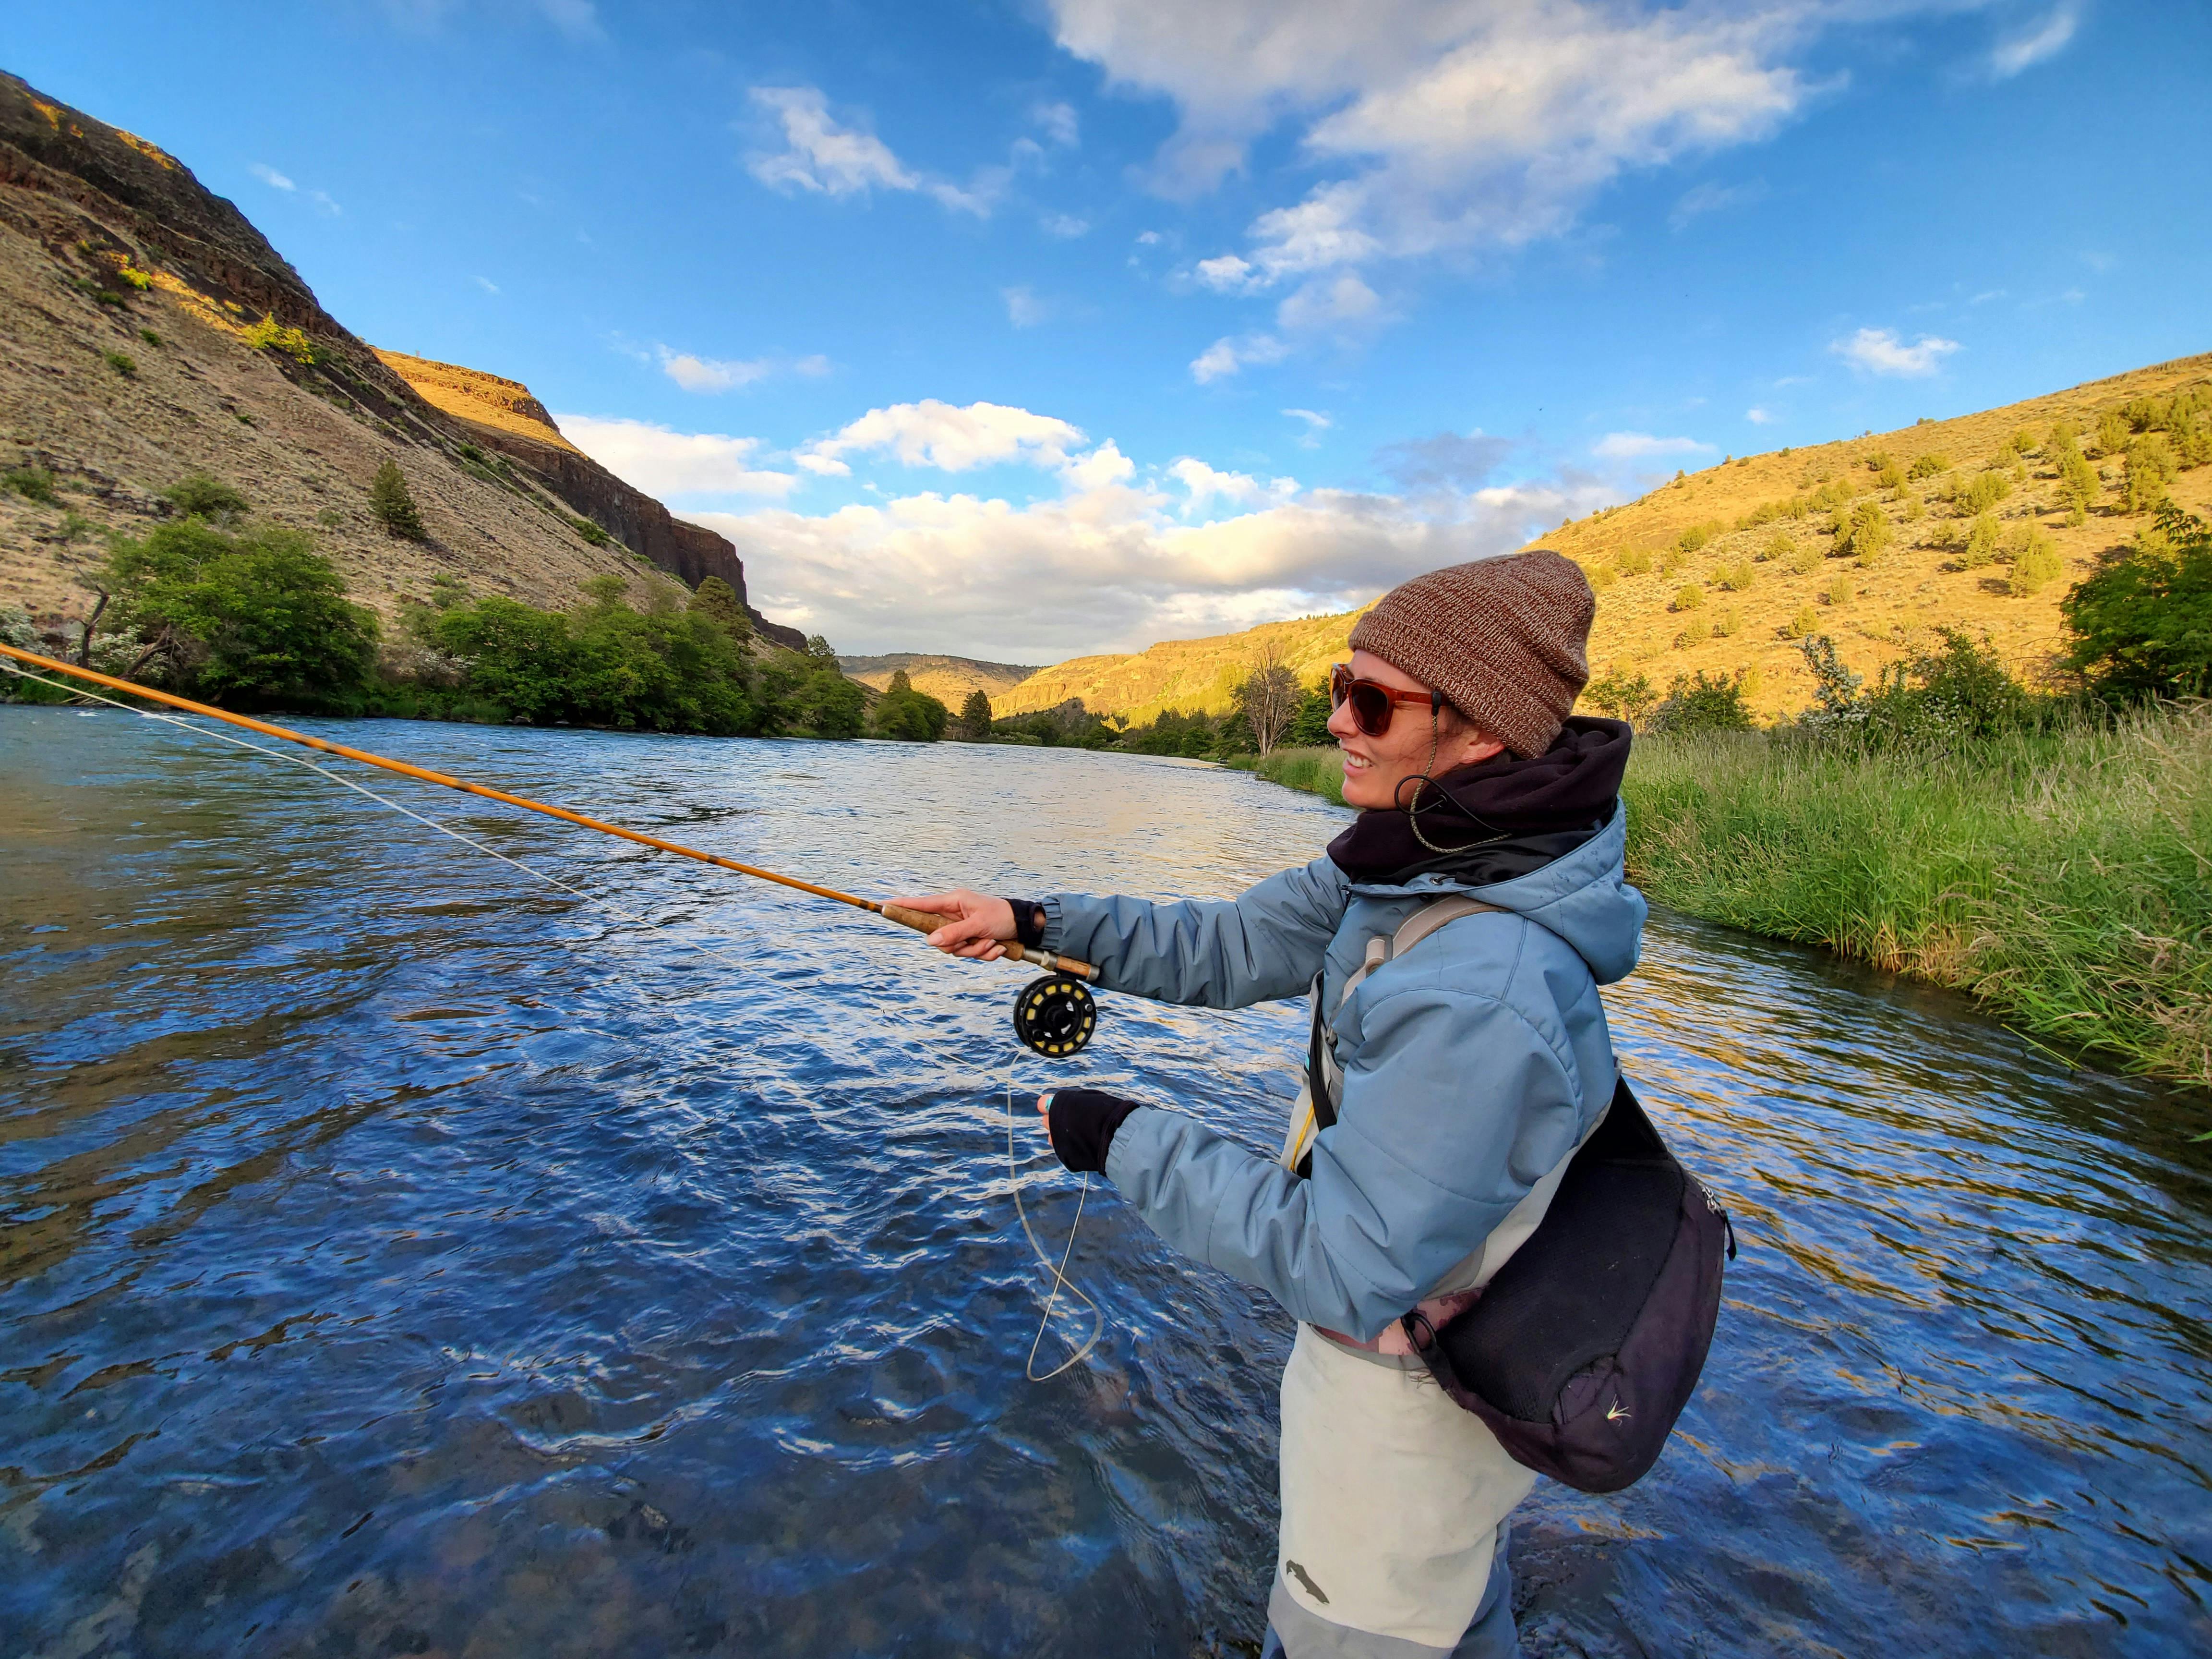 A woman in a hat, a blue jacket, and waders casts a fly fishing rod